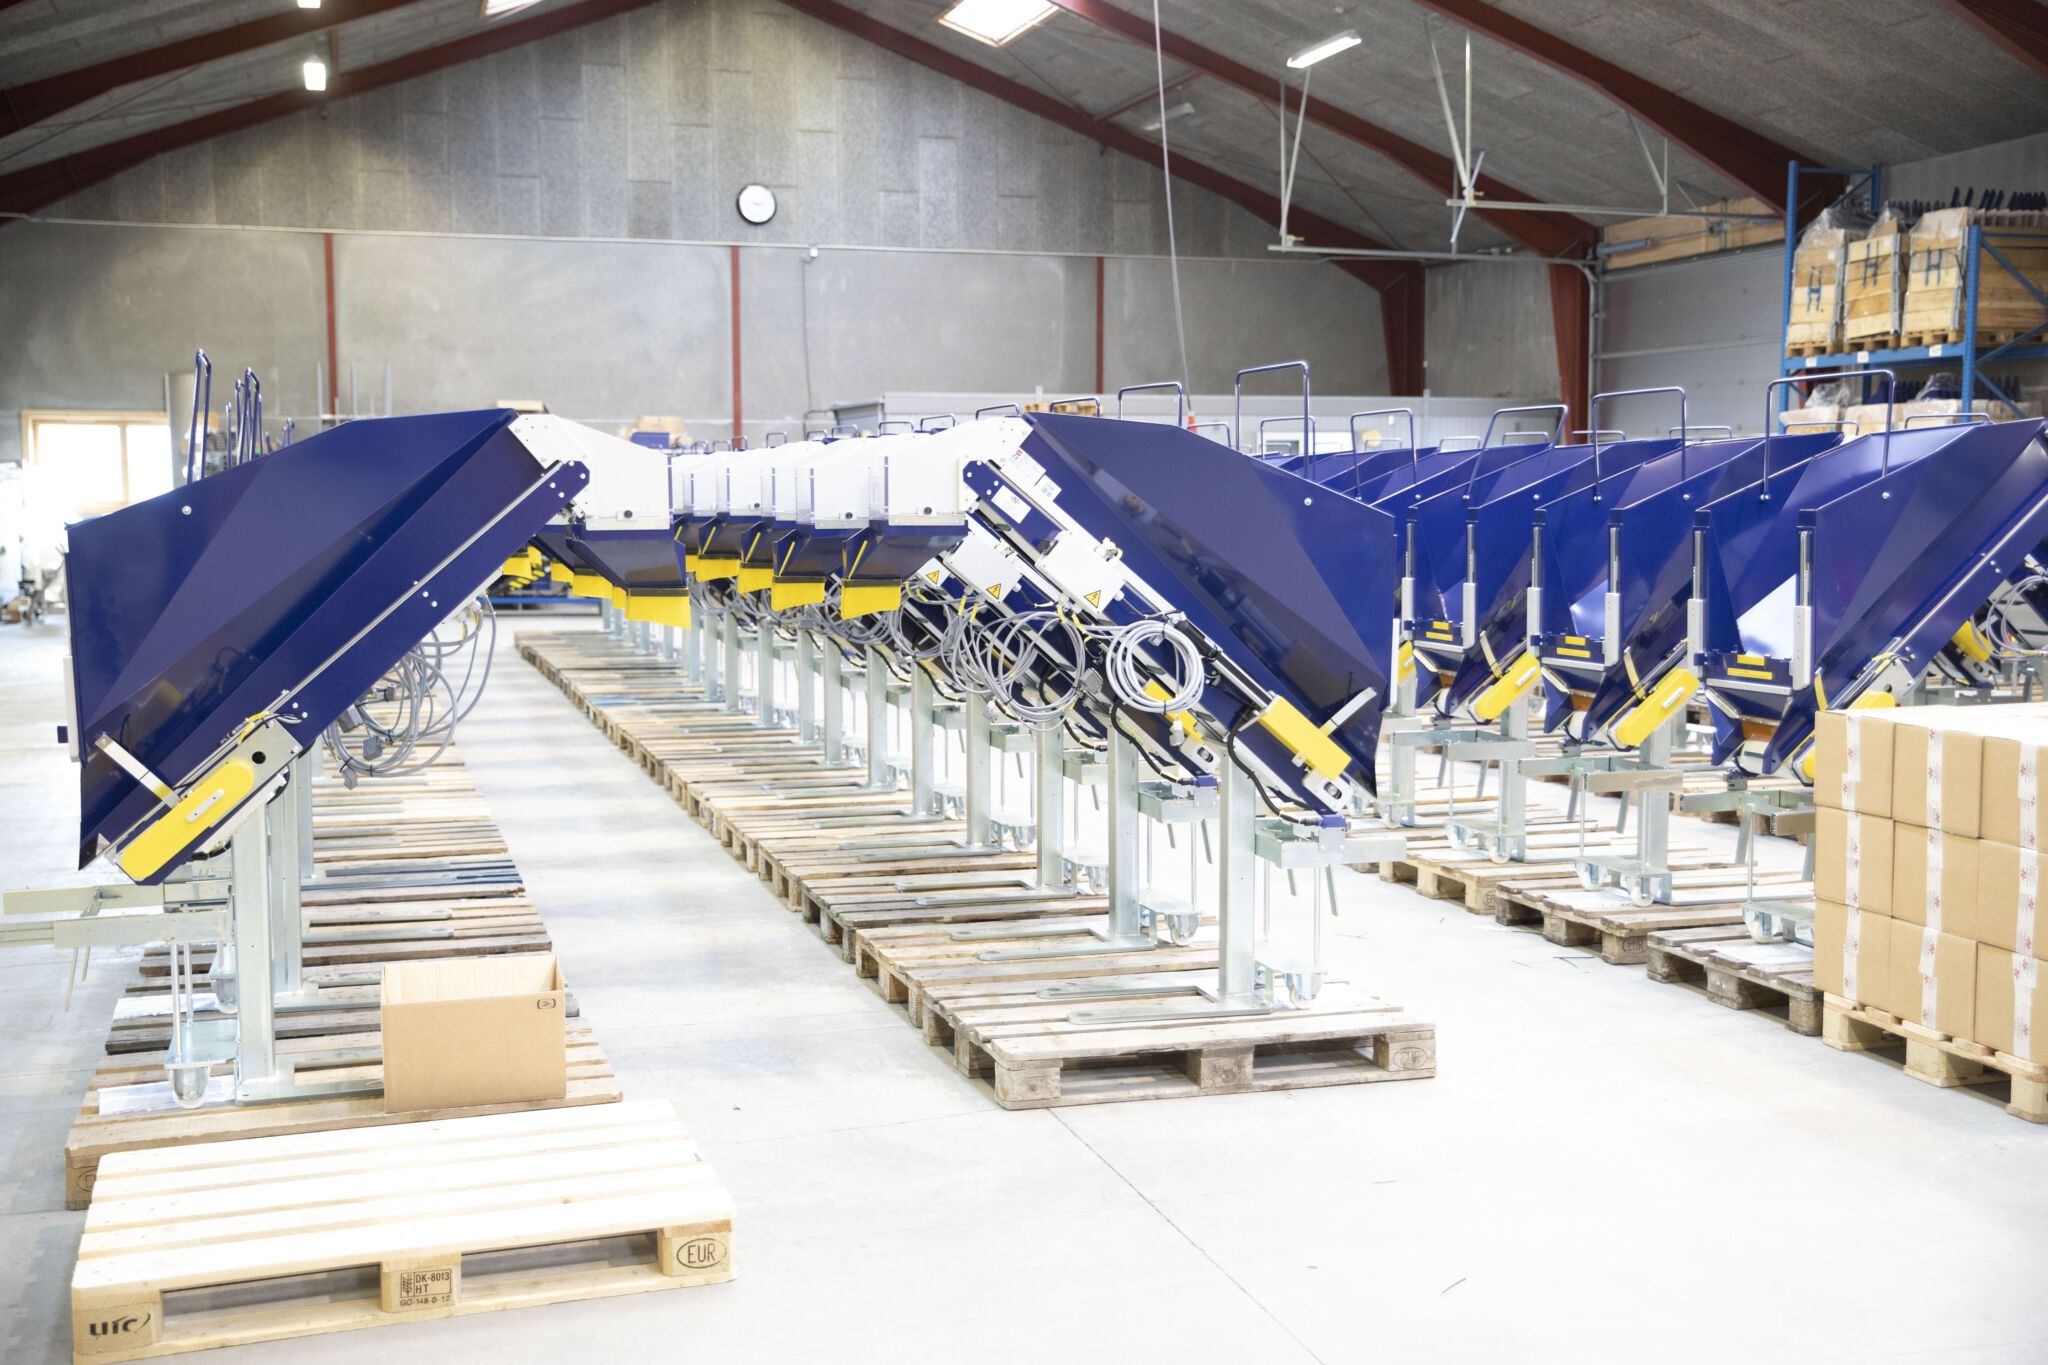 Finished conveyor systems lined up